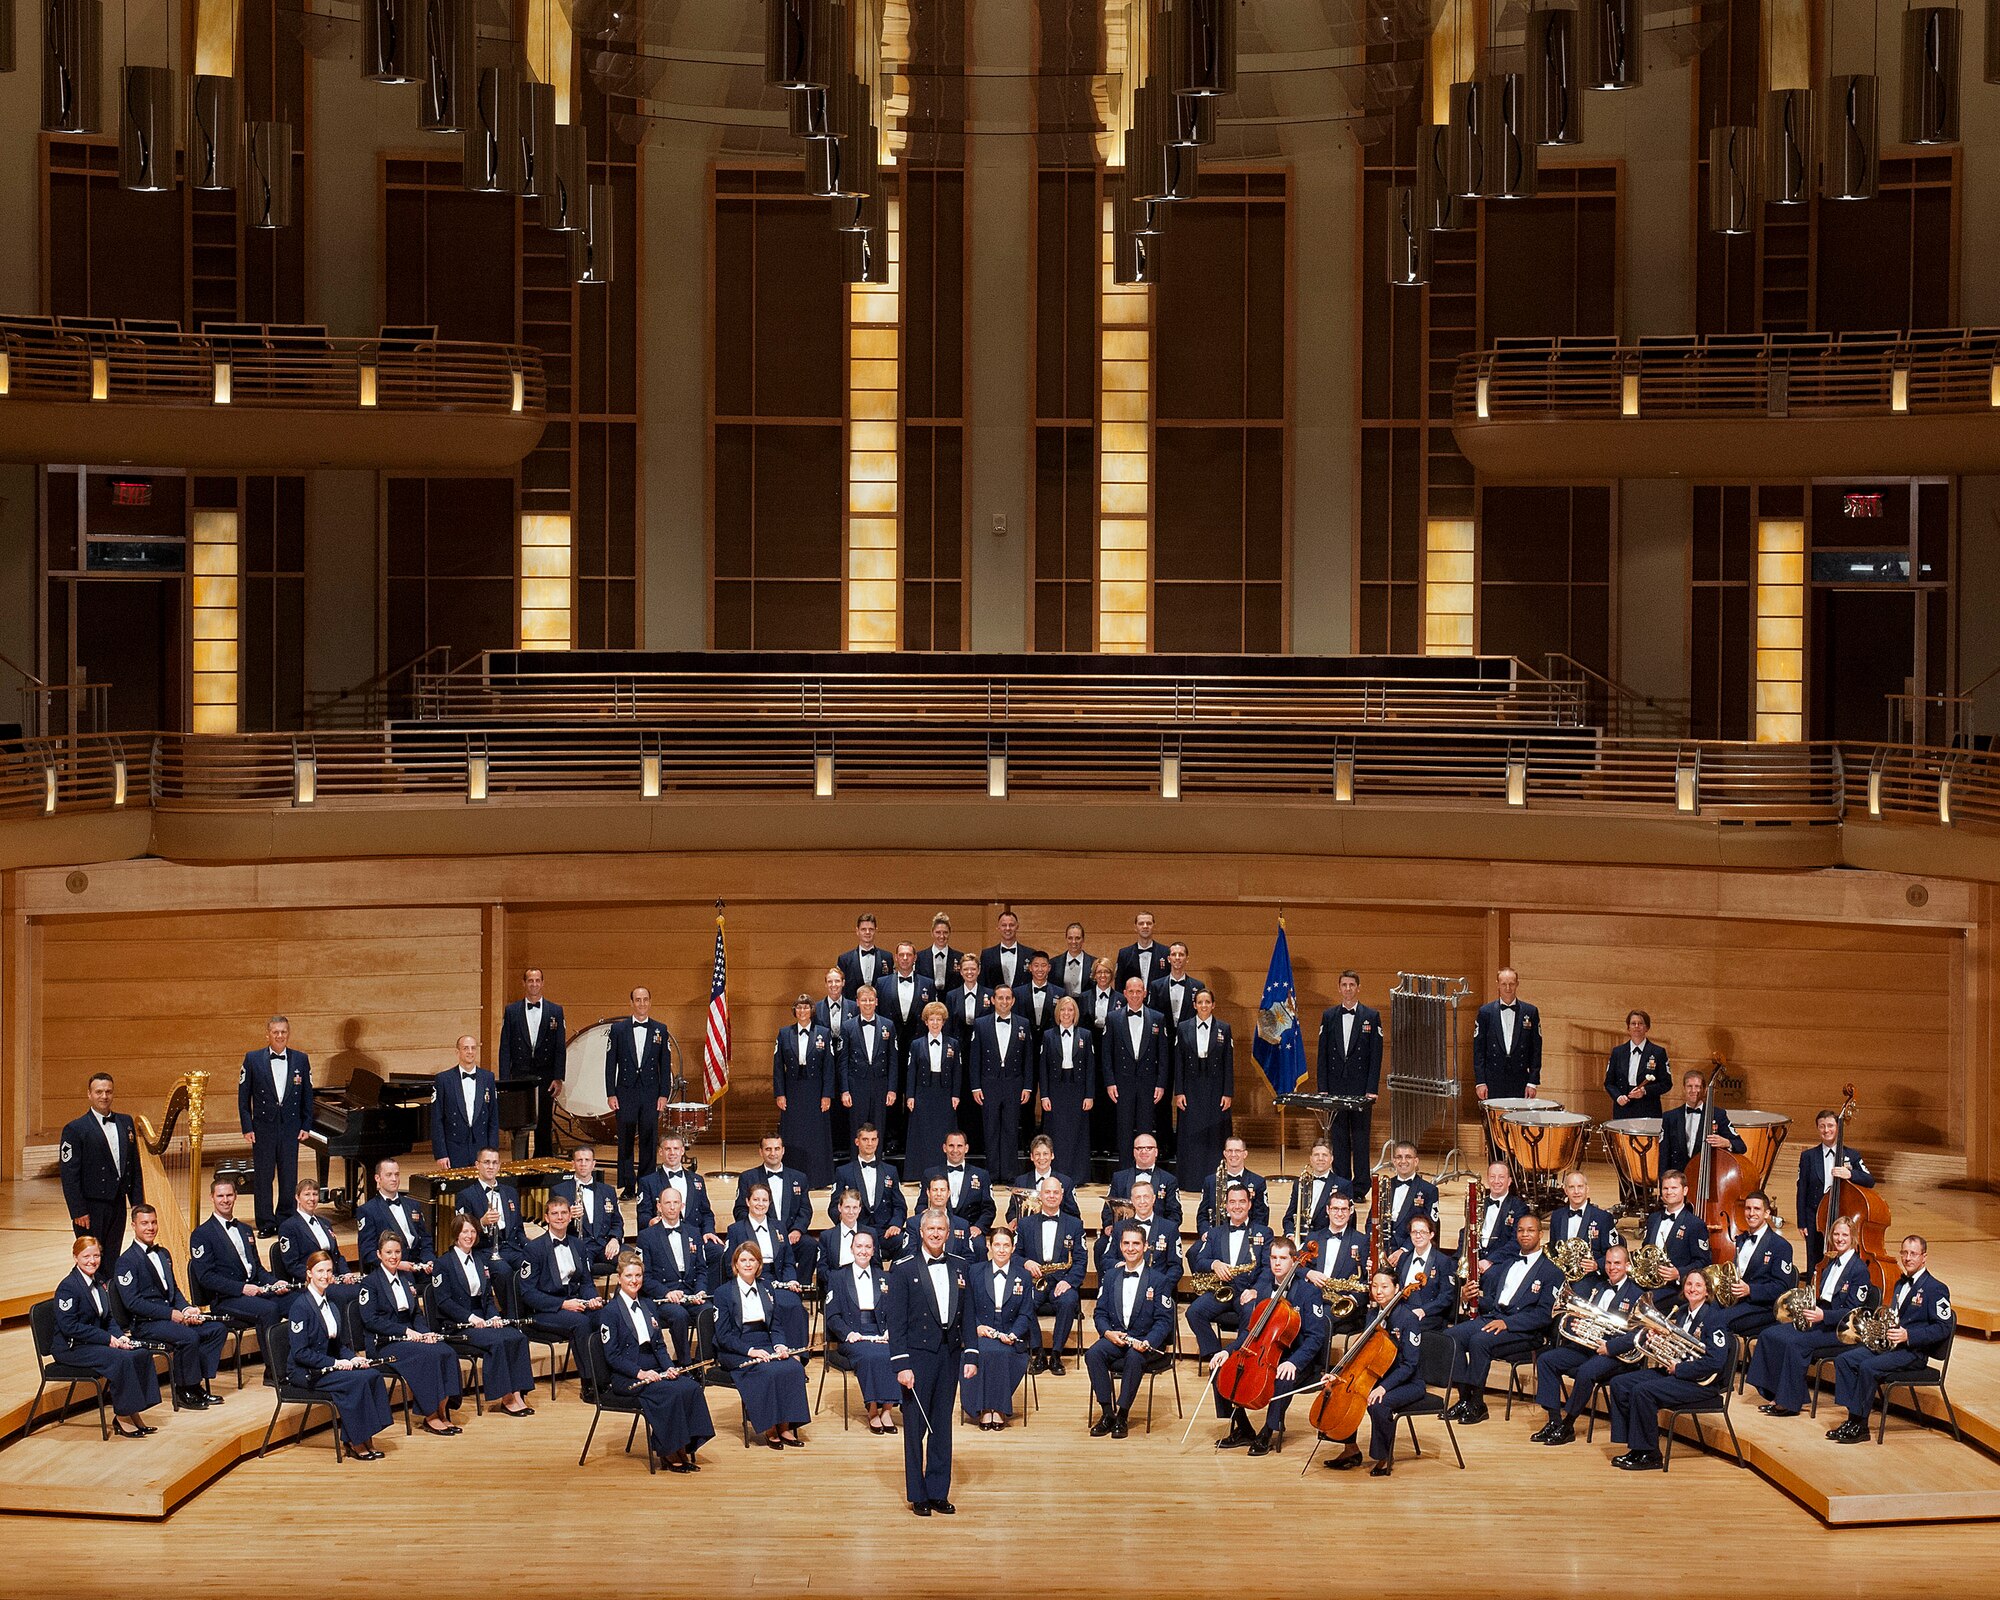 The Air Force Concert Band & Singing Sergeants with commander and conductor, Col. Larry H. Lang. (U.S. Air Force photo)
